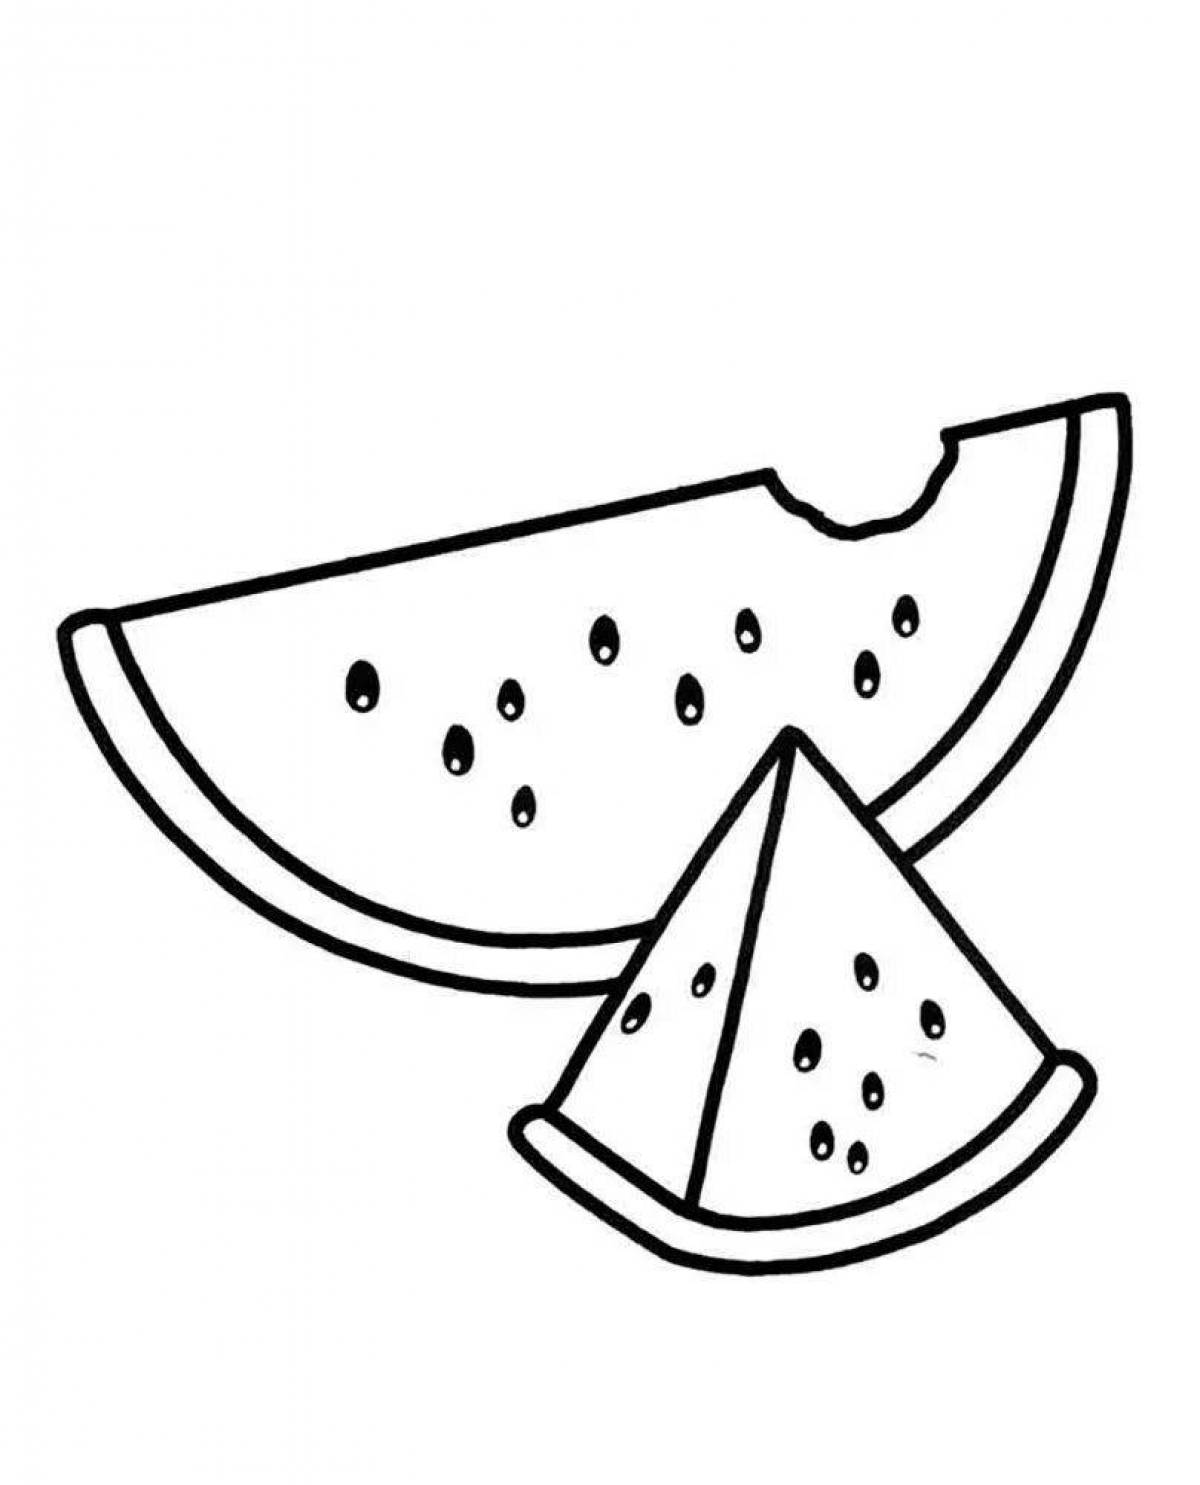 Sweet watermelon slice coloring page